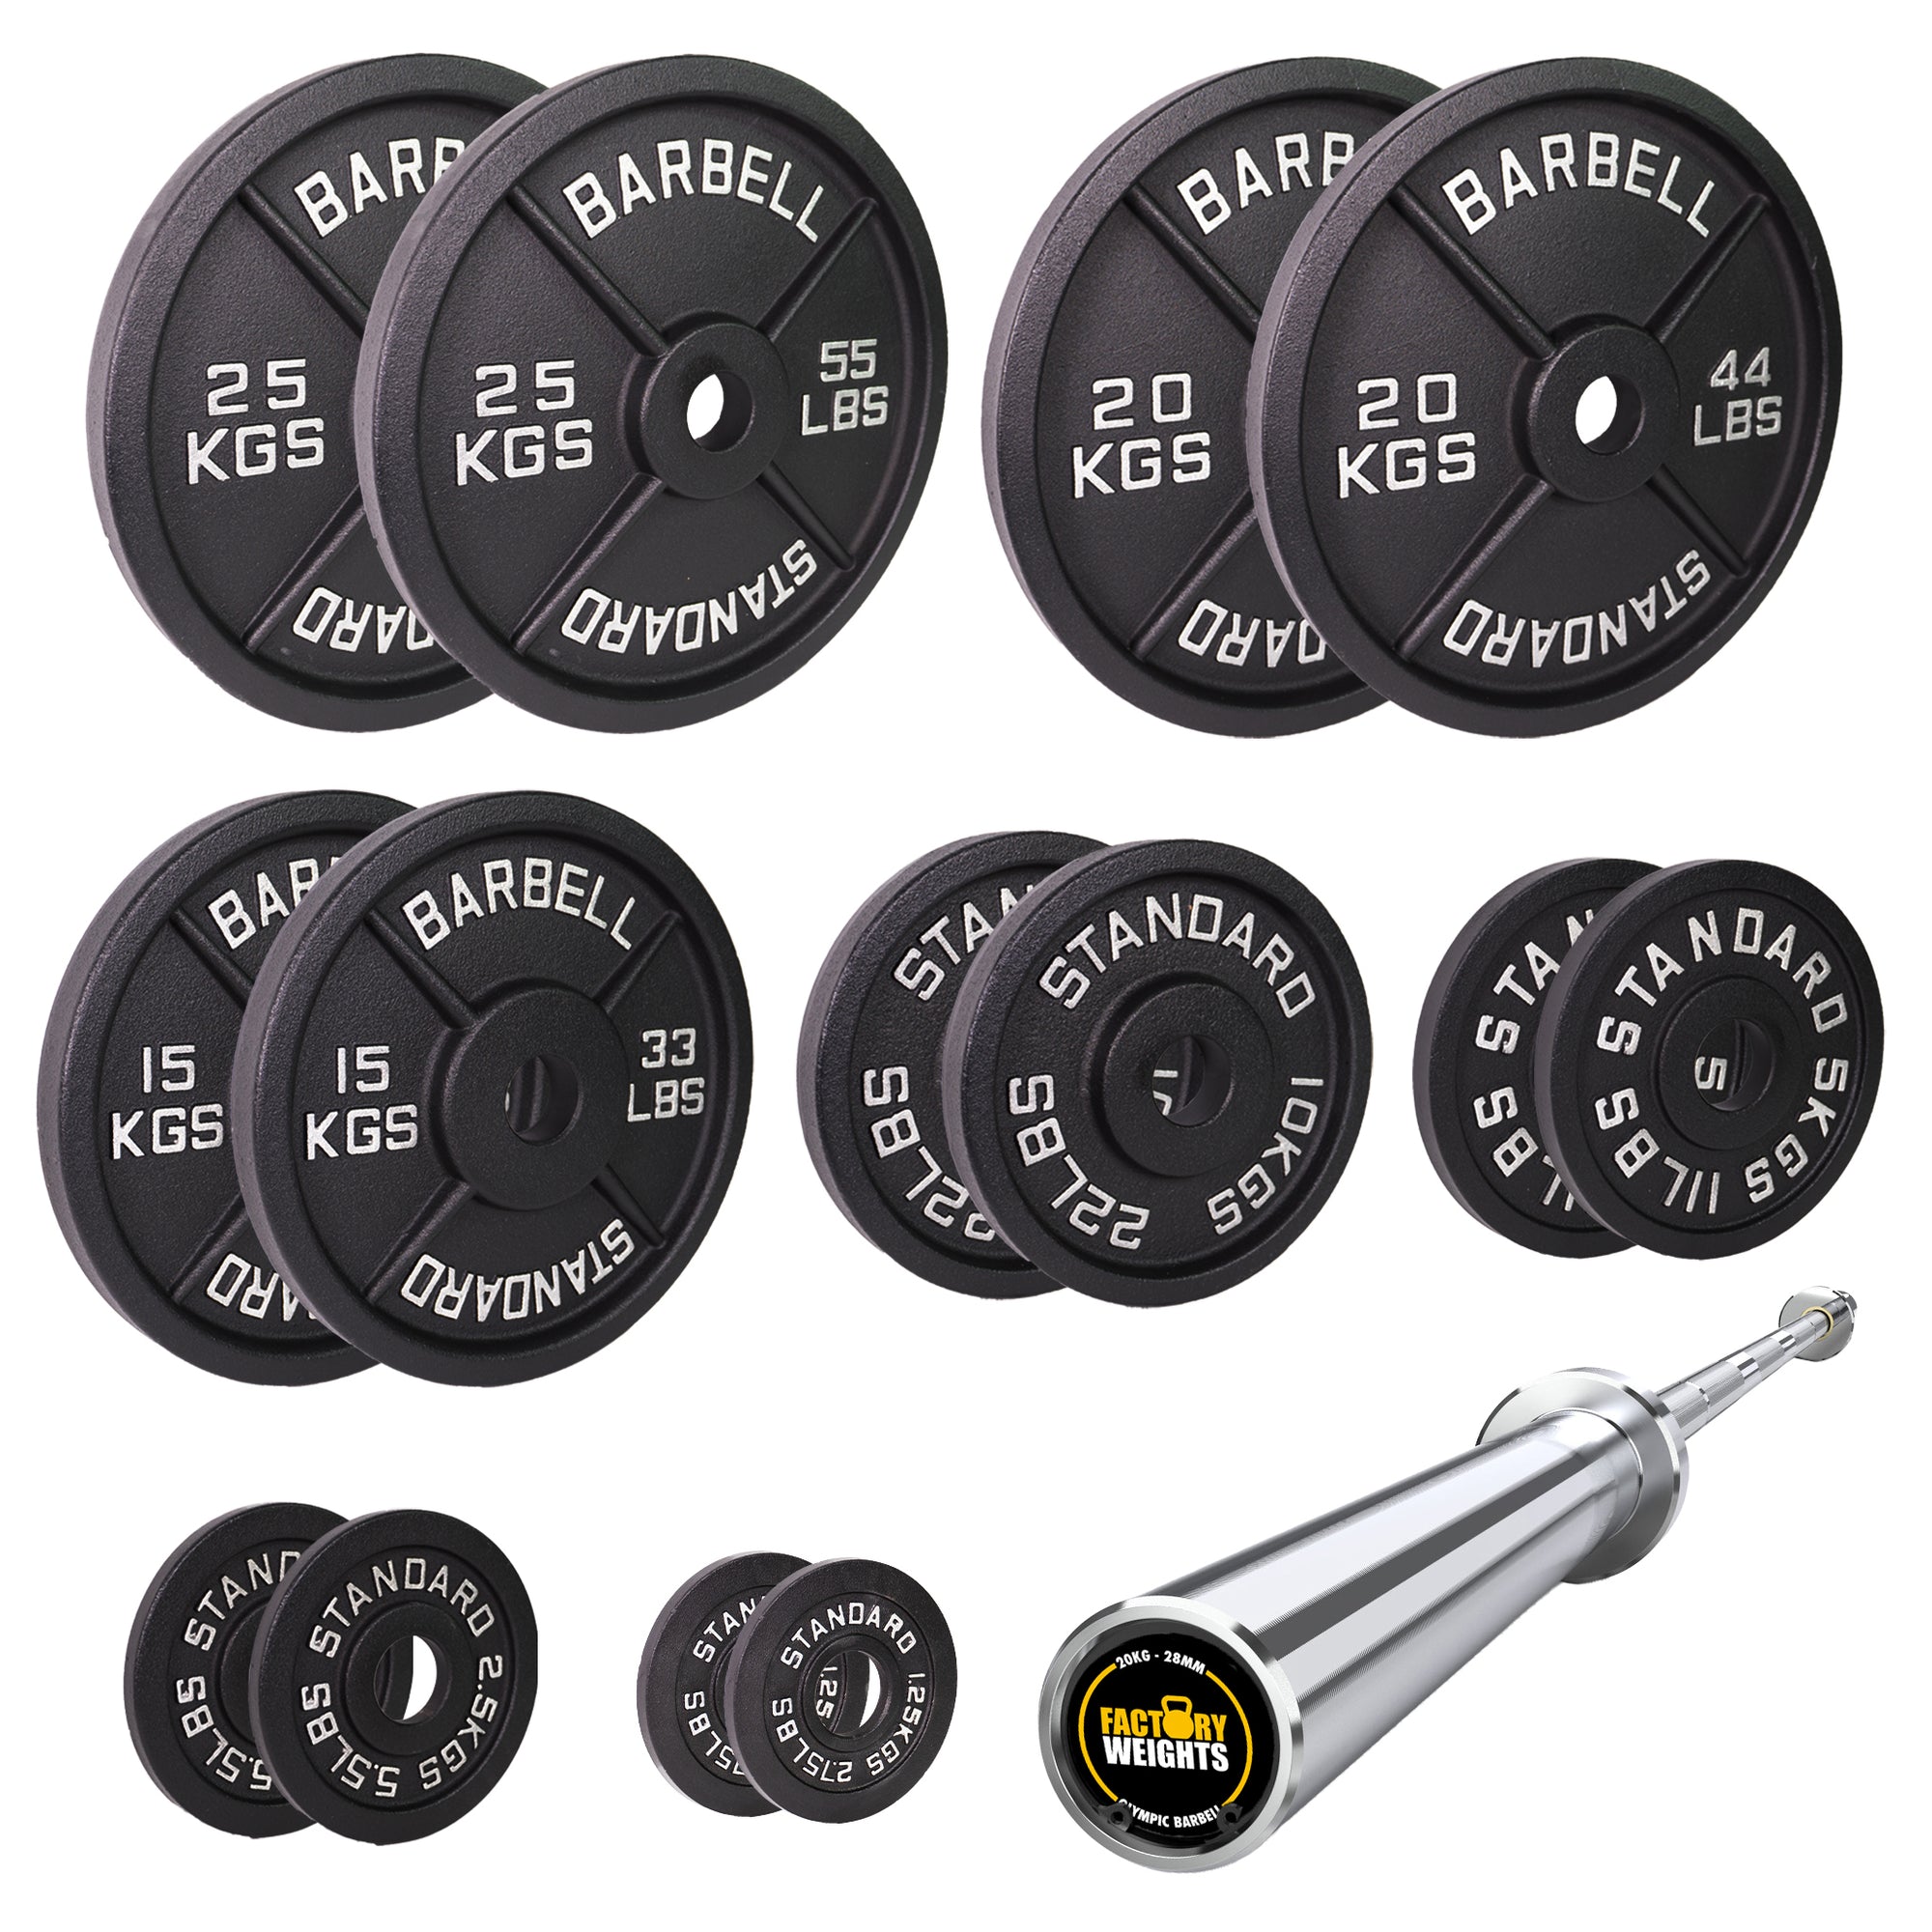 157.5kg Cast Iron Plate Set With Barbell